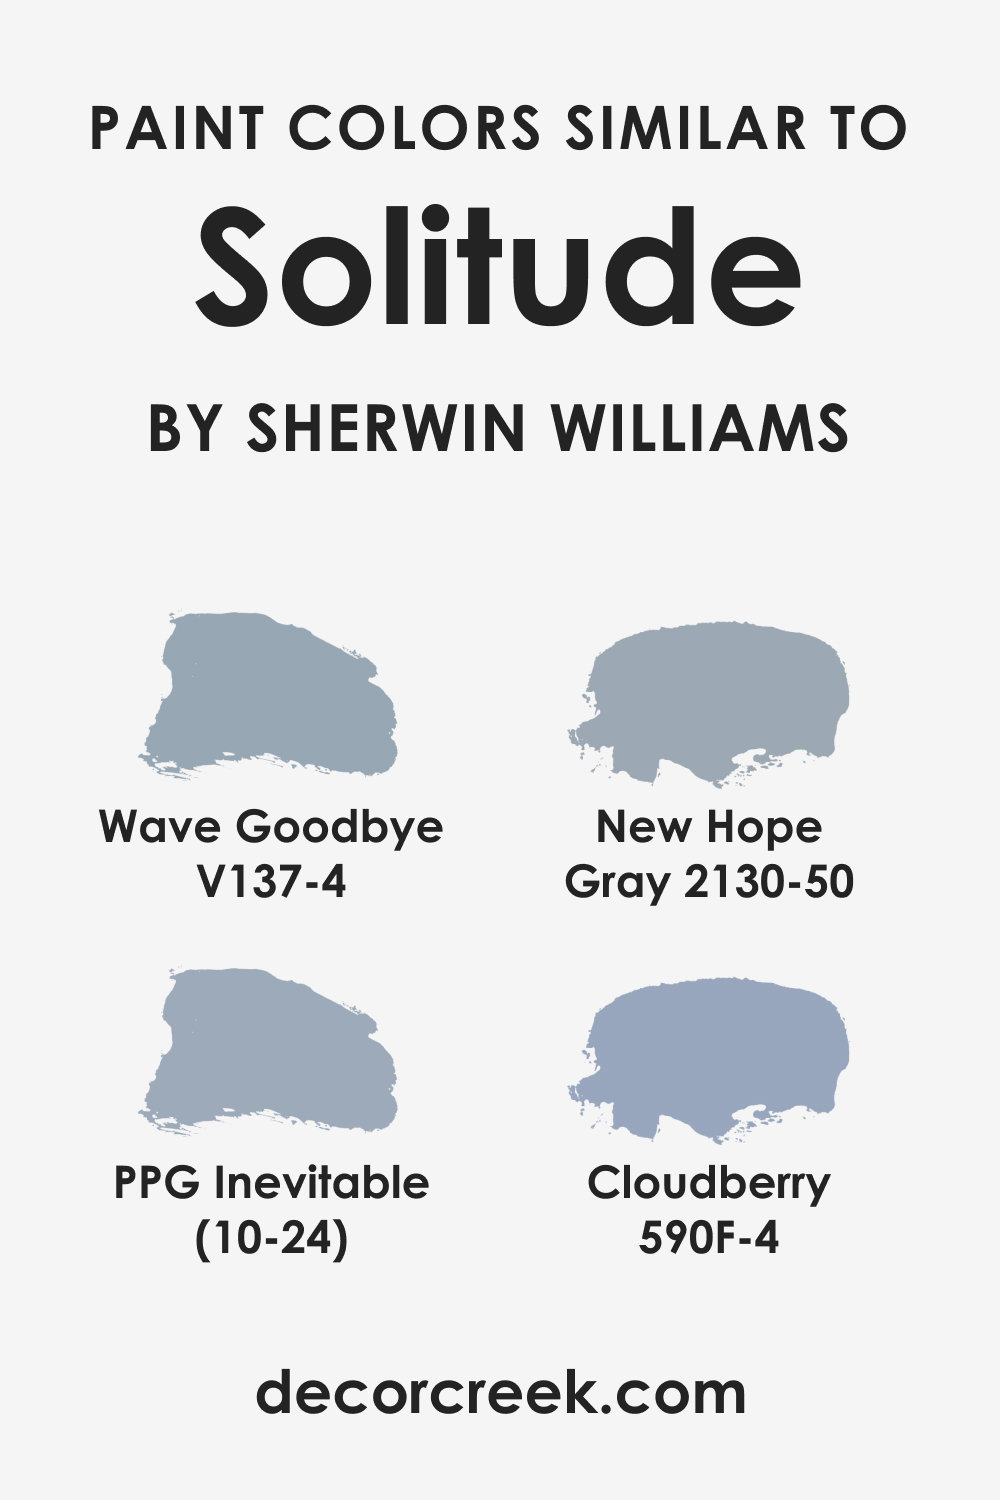 Colors Similar to SW 6535 Solitude